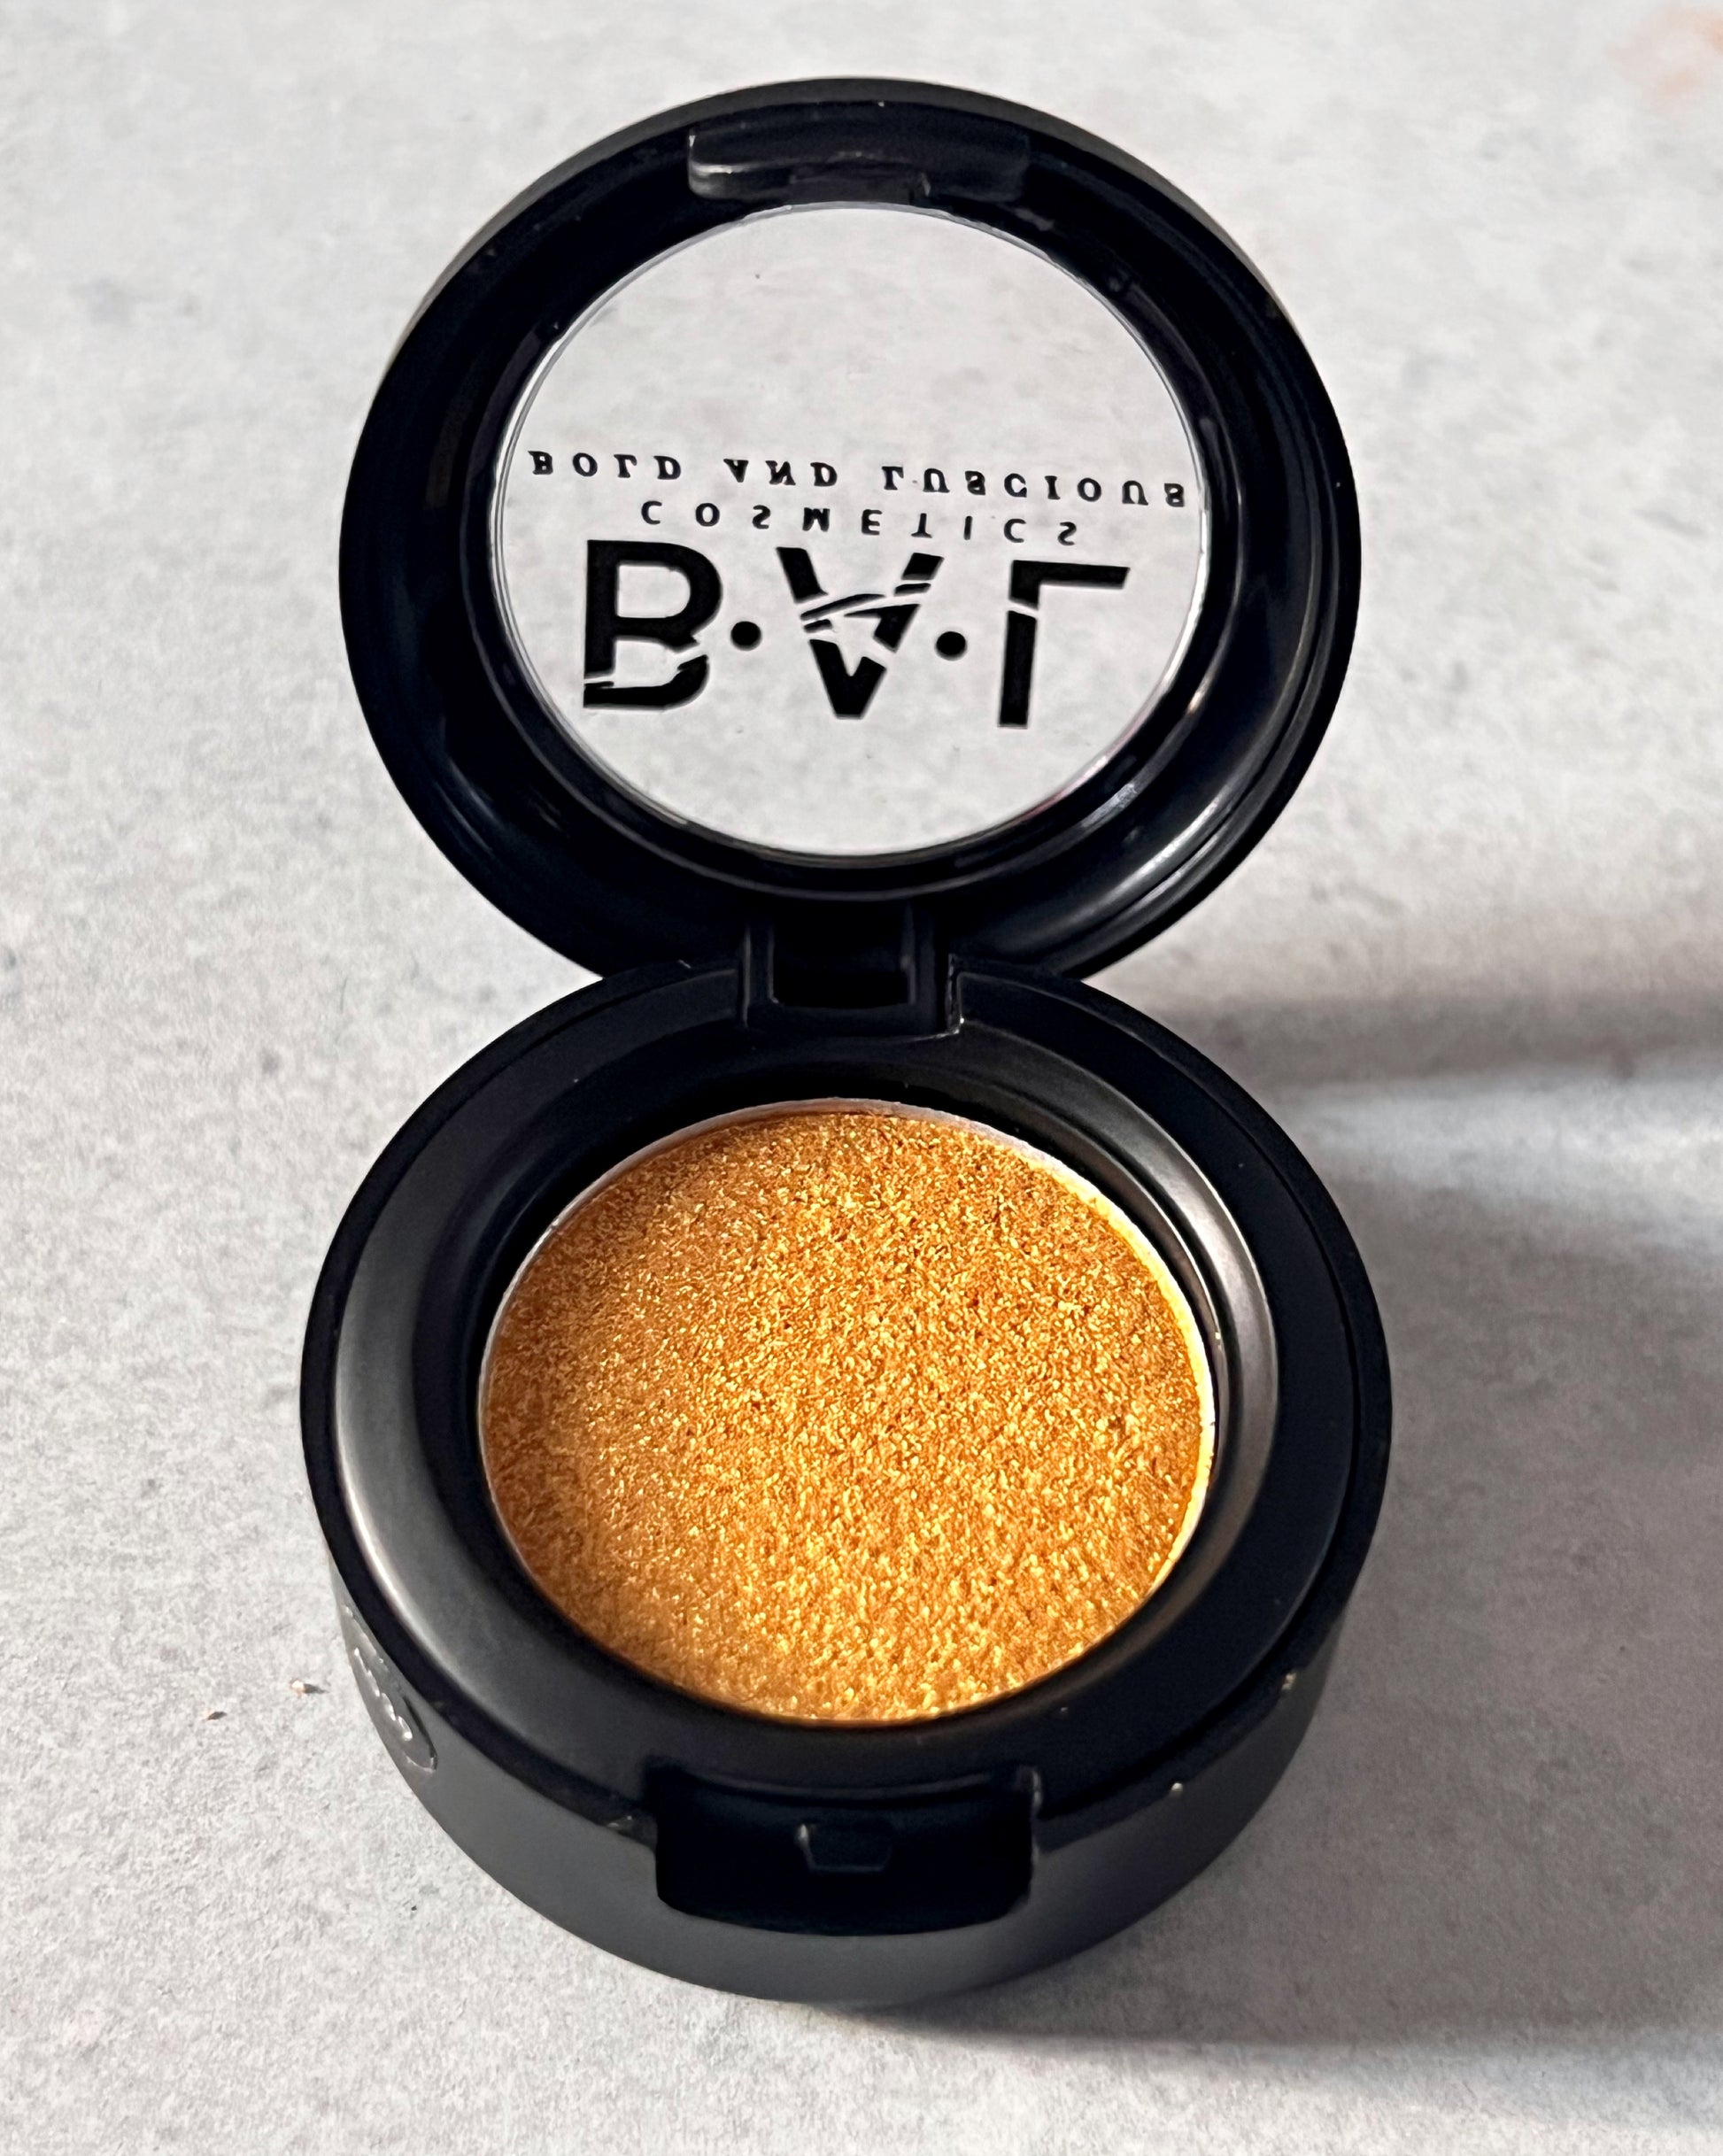 A Golden color that is pure and shimmerry. This is the perfect color to use as a highlight.